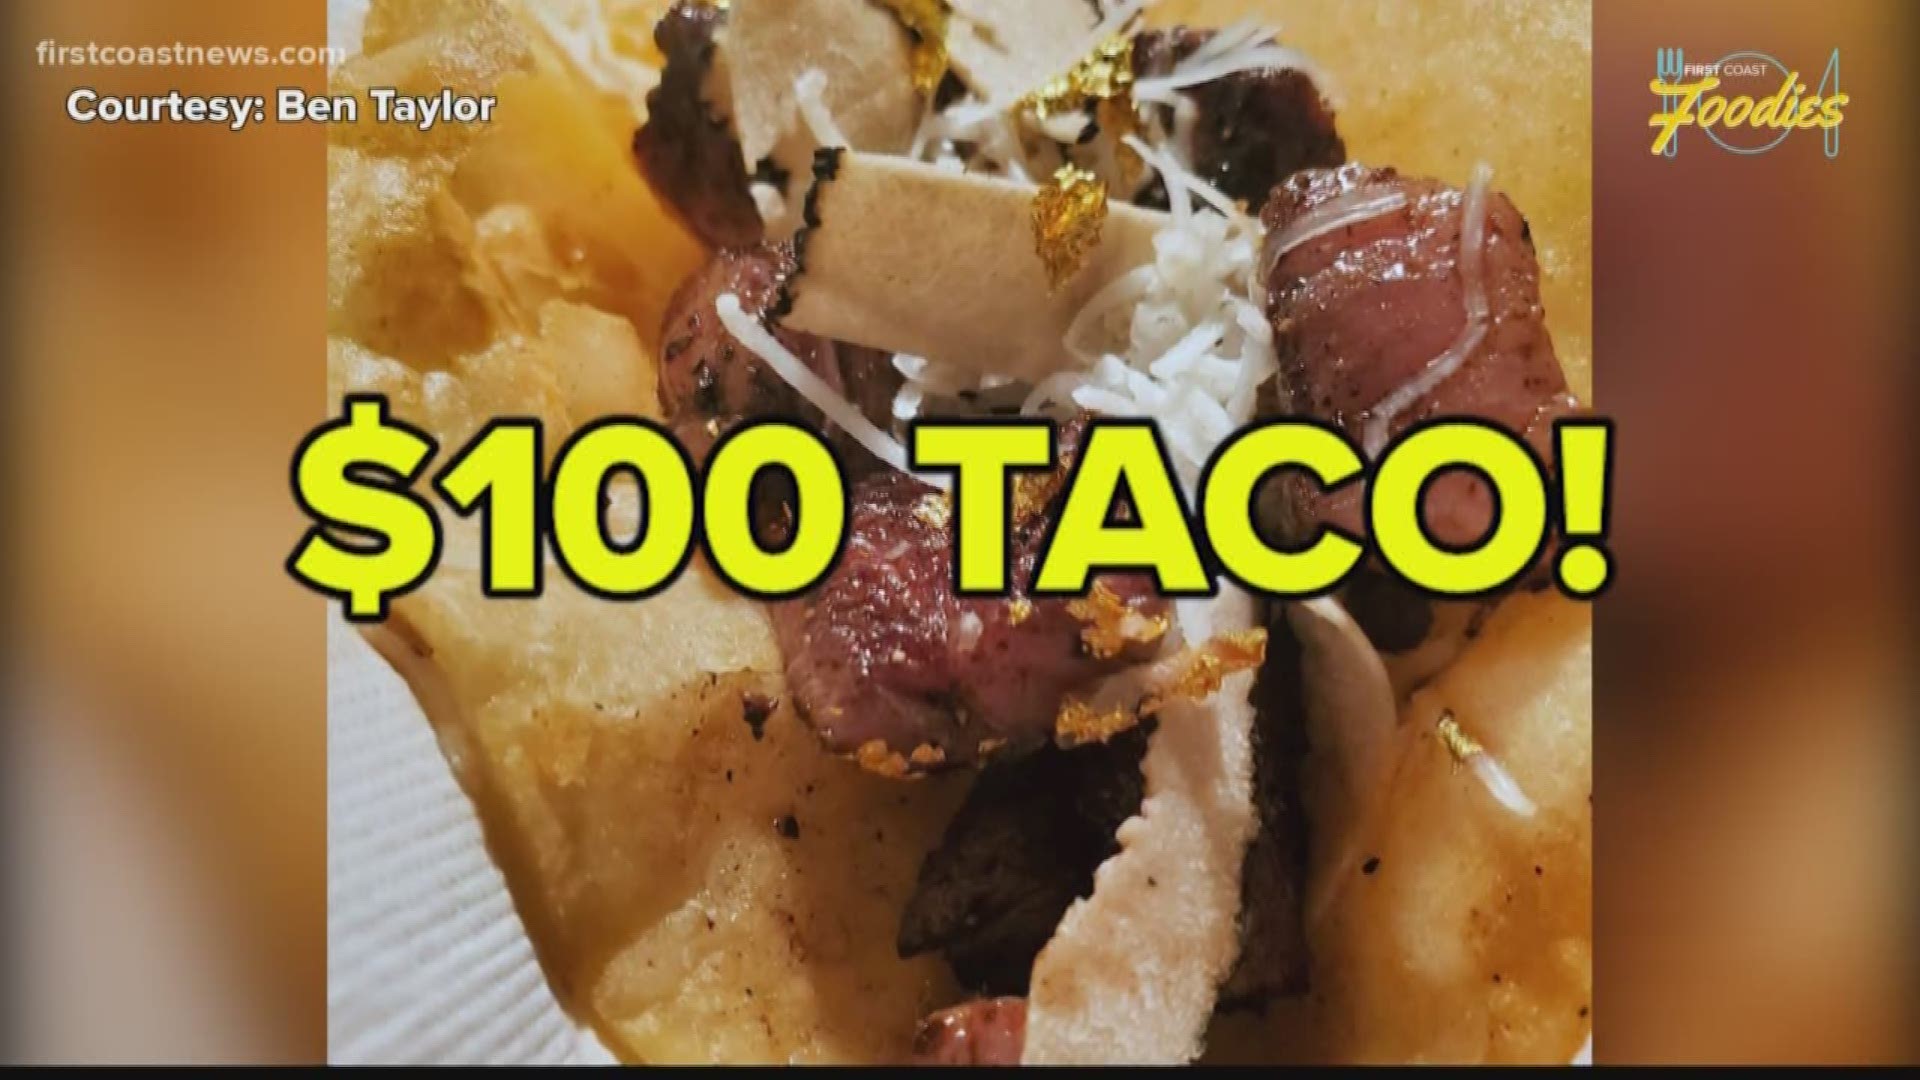 The Jax Taco Fest is on Aug. 17 from 1 p.m. to 7 p.m. Here's everything you need to know when it comes to what kinds of tacos will be available to parking.